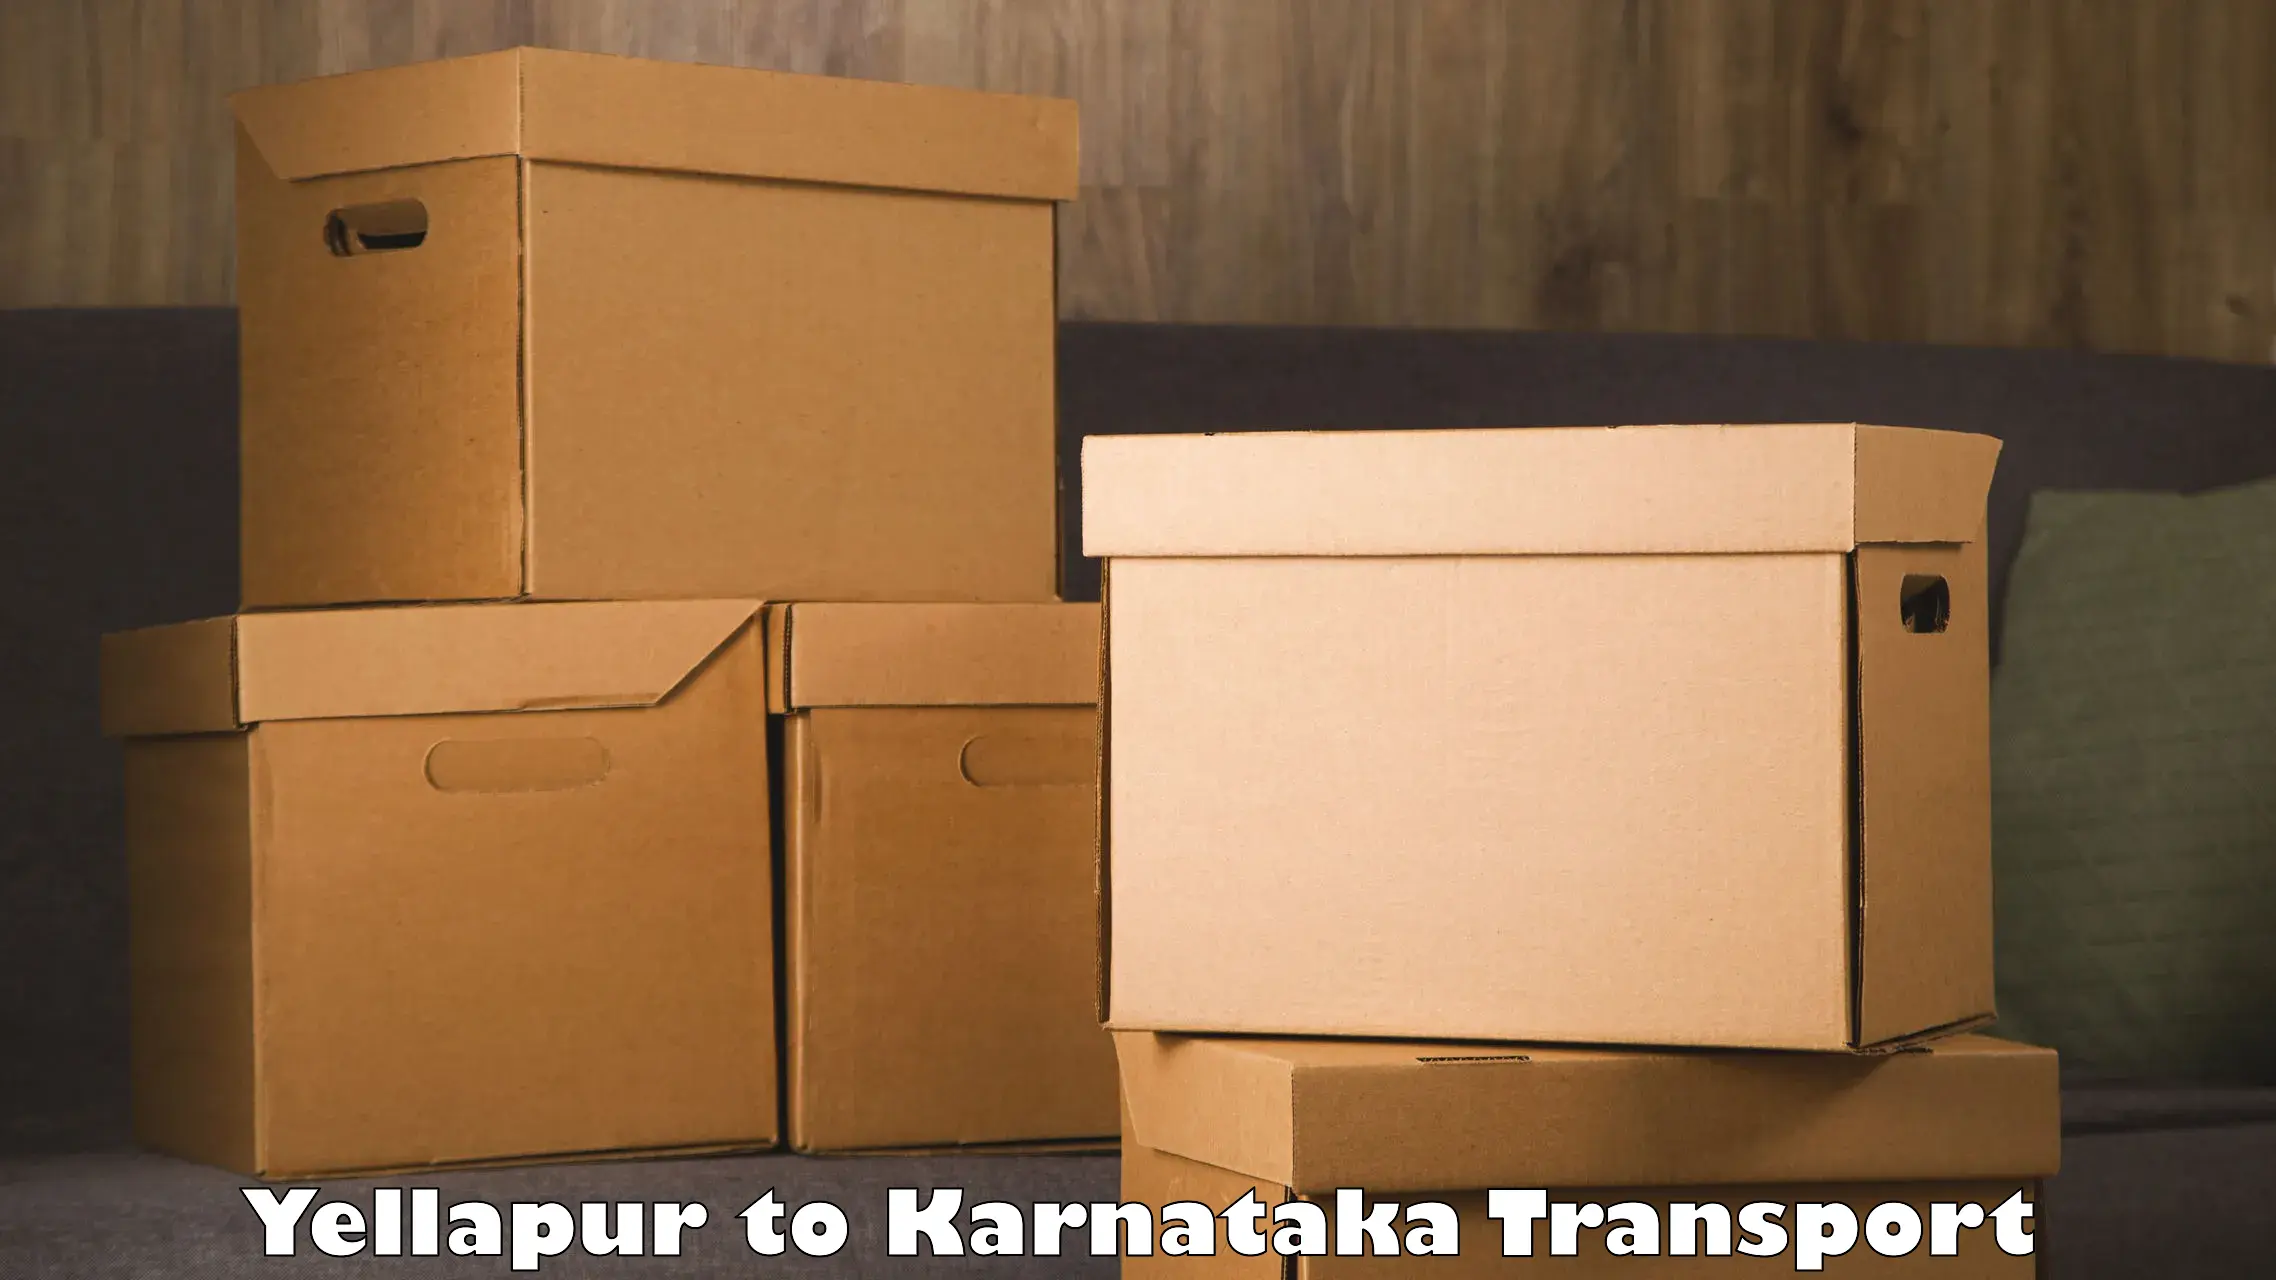 Two wheeler parcel service Yellapur to Manipal